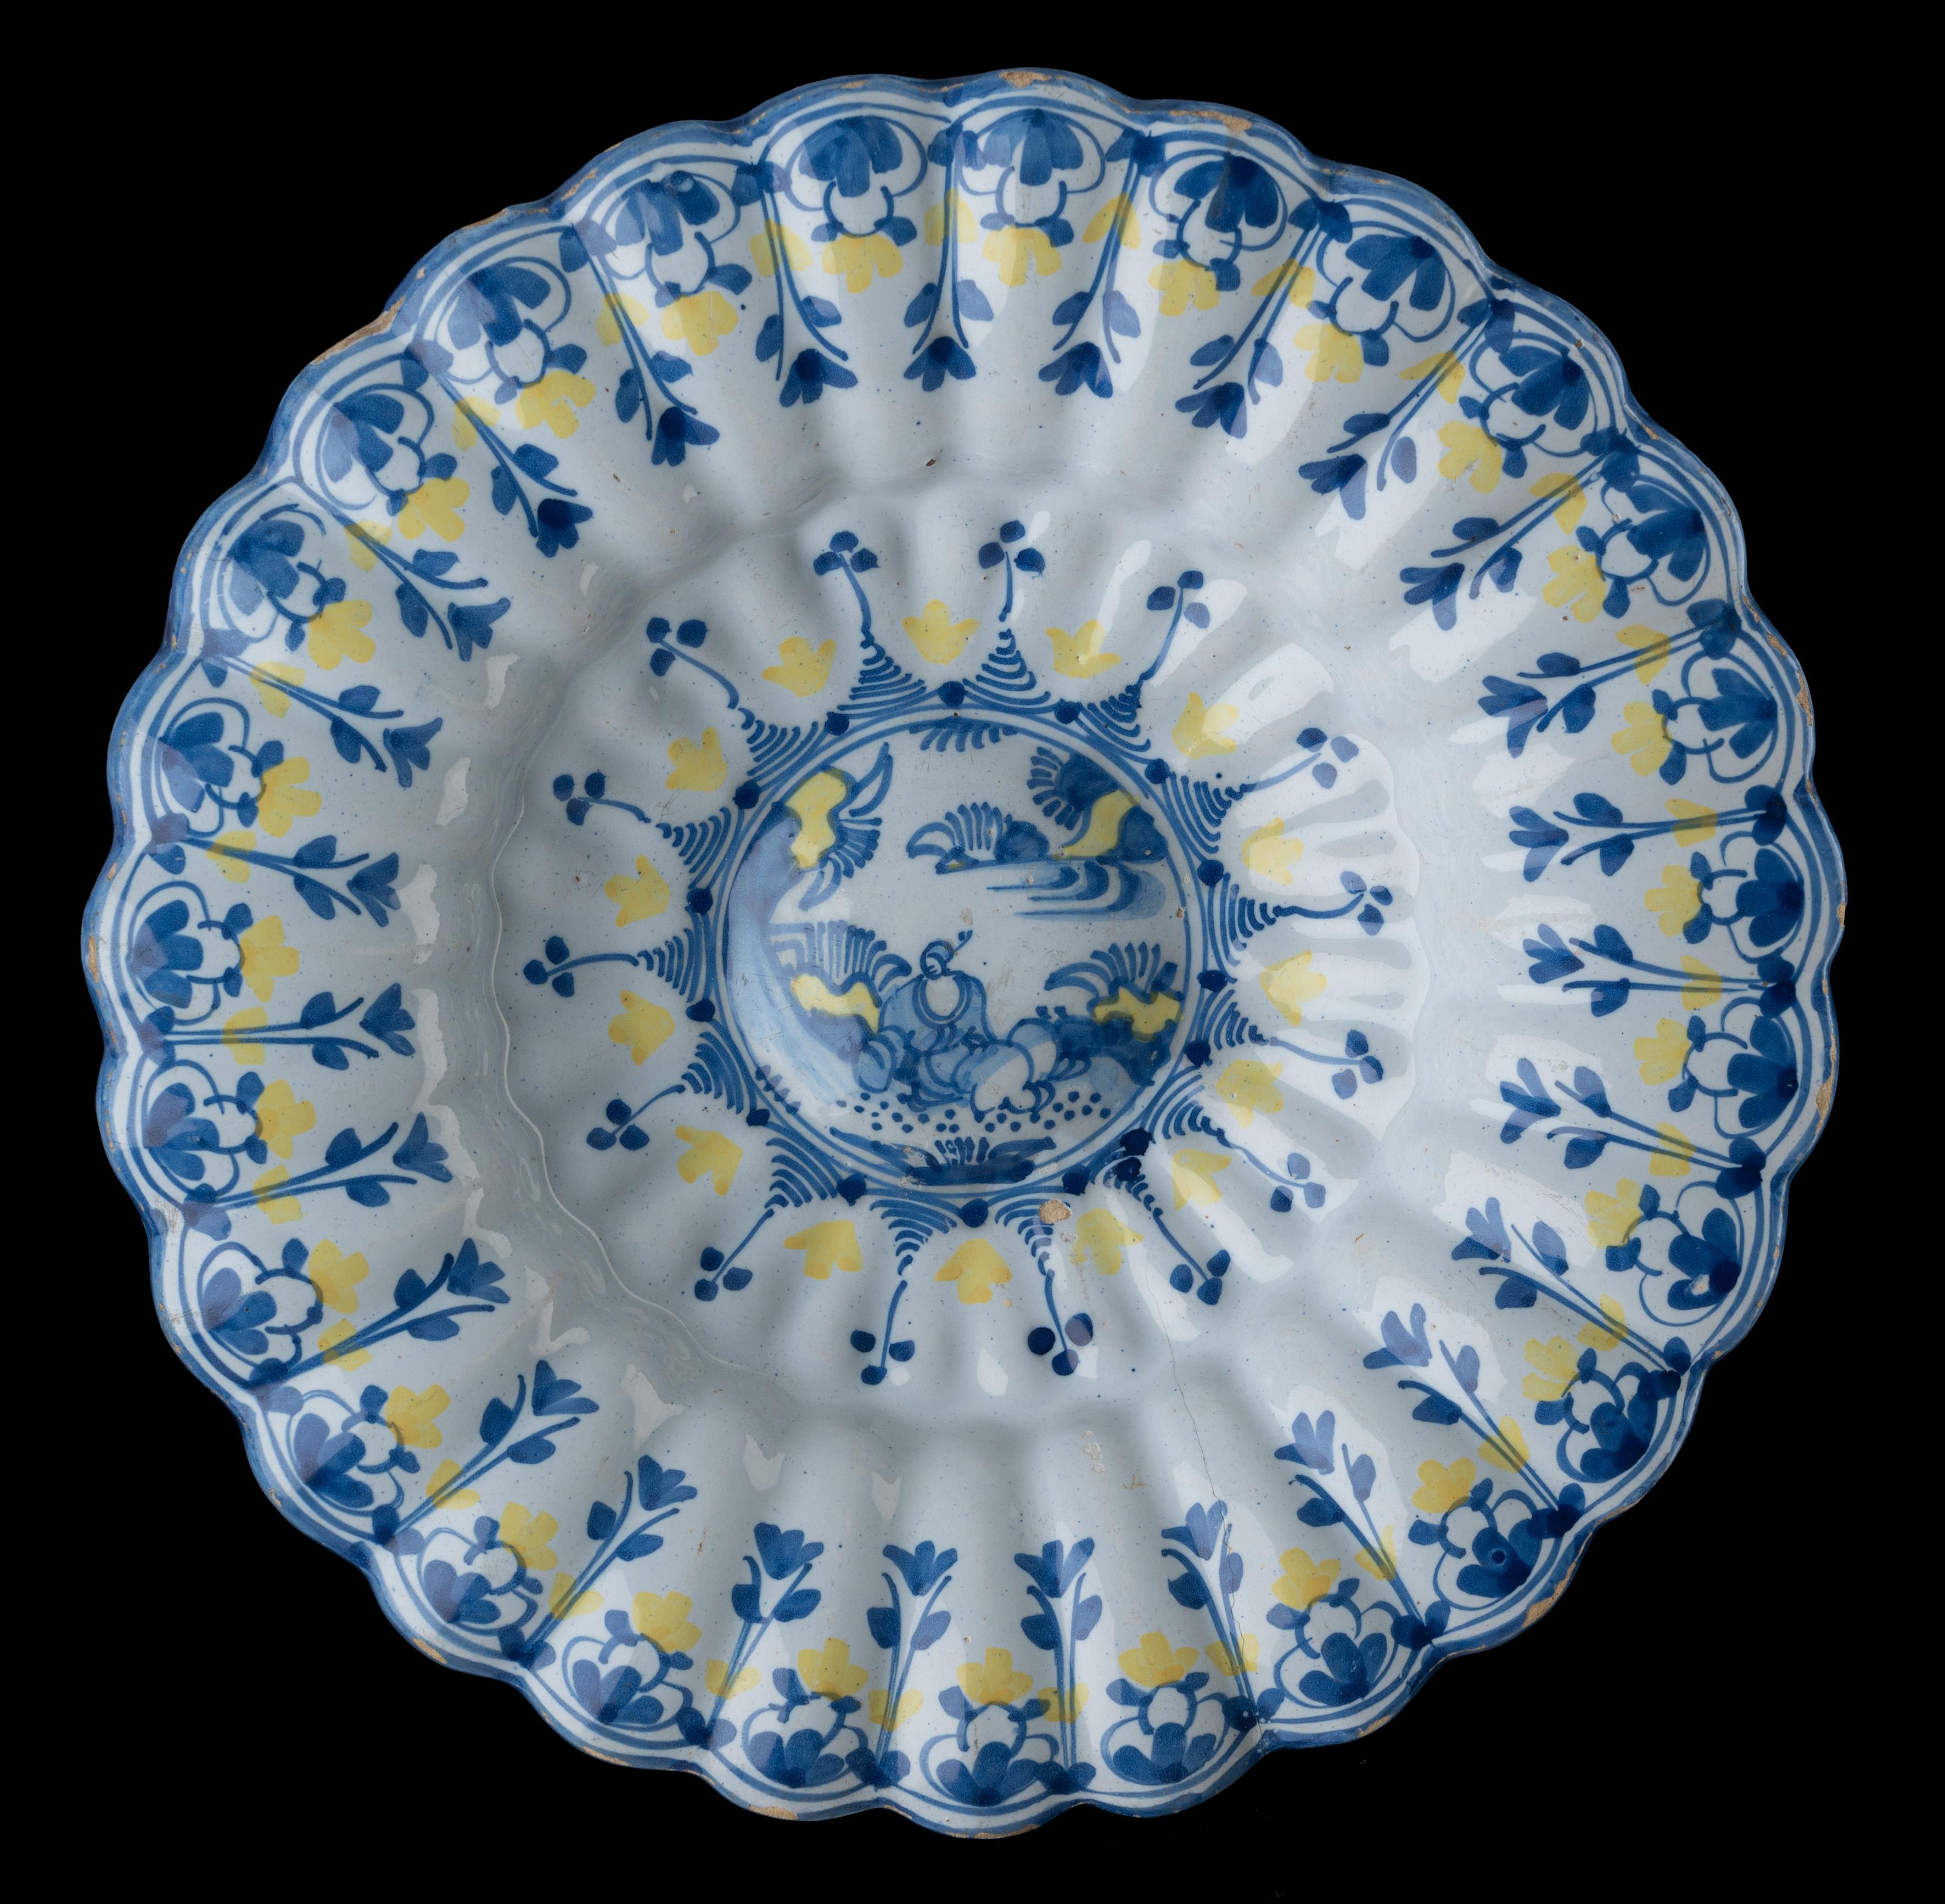 Blue and yellow chinoiserie lobed dish. Delft, 1680-1700 
Dimensions: diameter 33,2 cm / 13.07 in. 

The blue and yellow lobed dish is composed of twenty-seven double lobes around a curved centre. It is painted with a Chinese figure in an